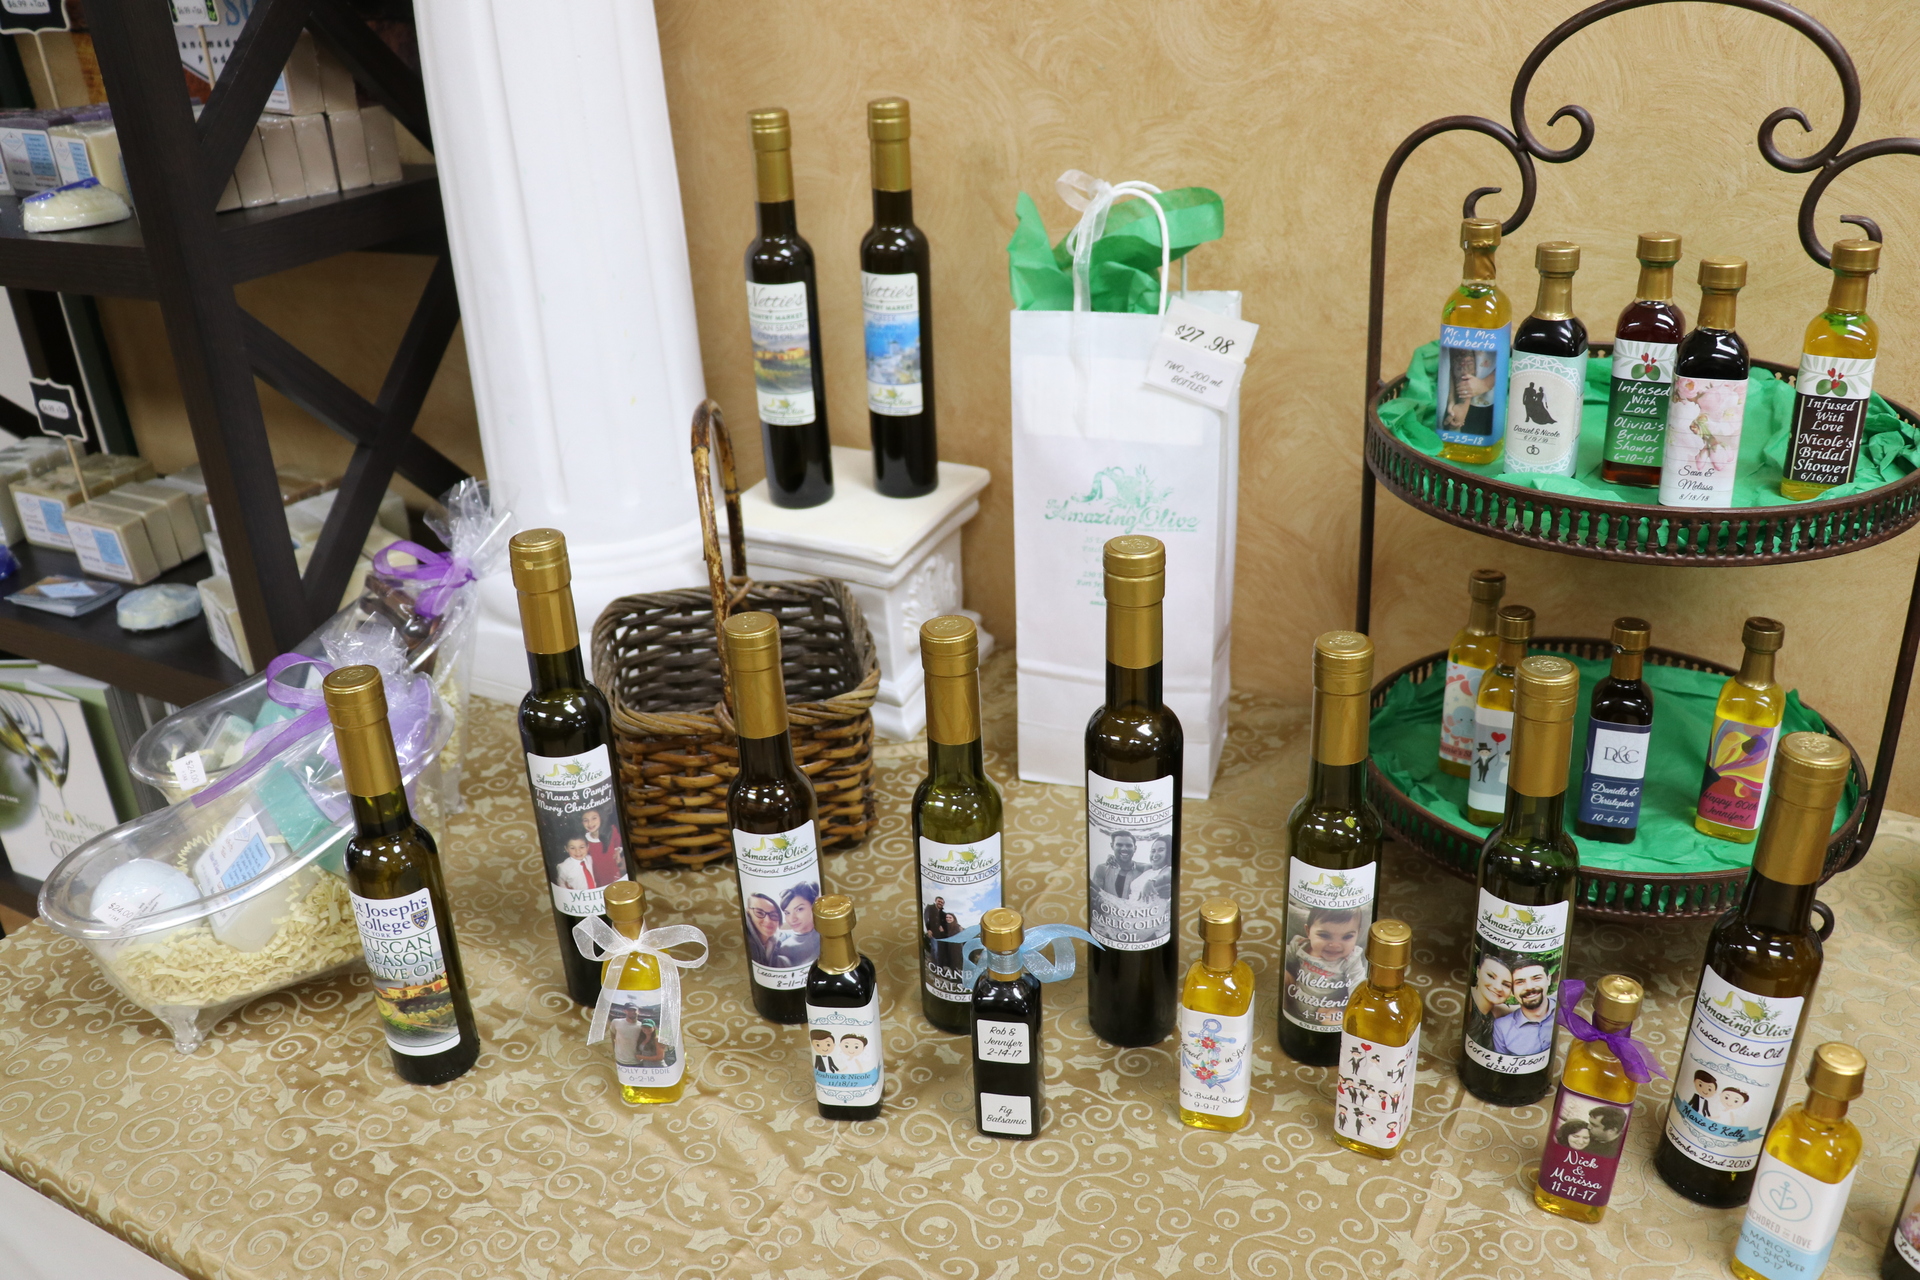 Amazing Olive's olive oils and balsamic vinegars with customized labels for party favors and wedding gifts.